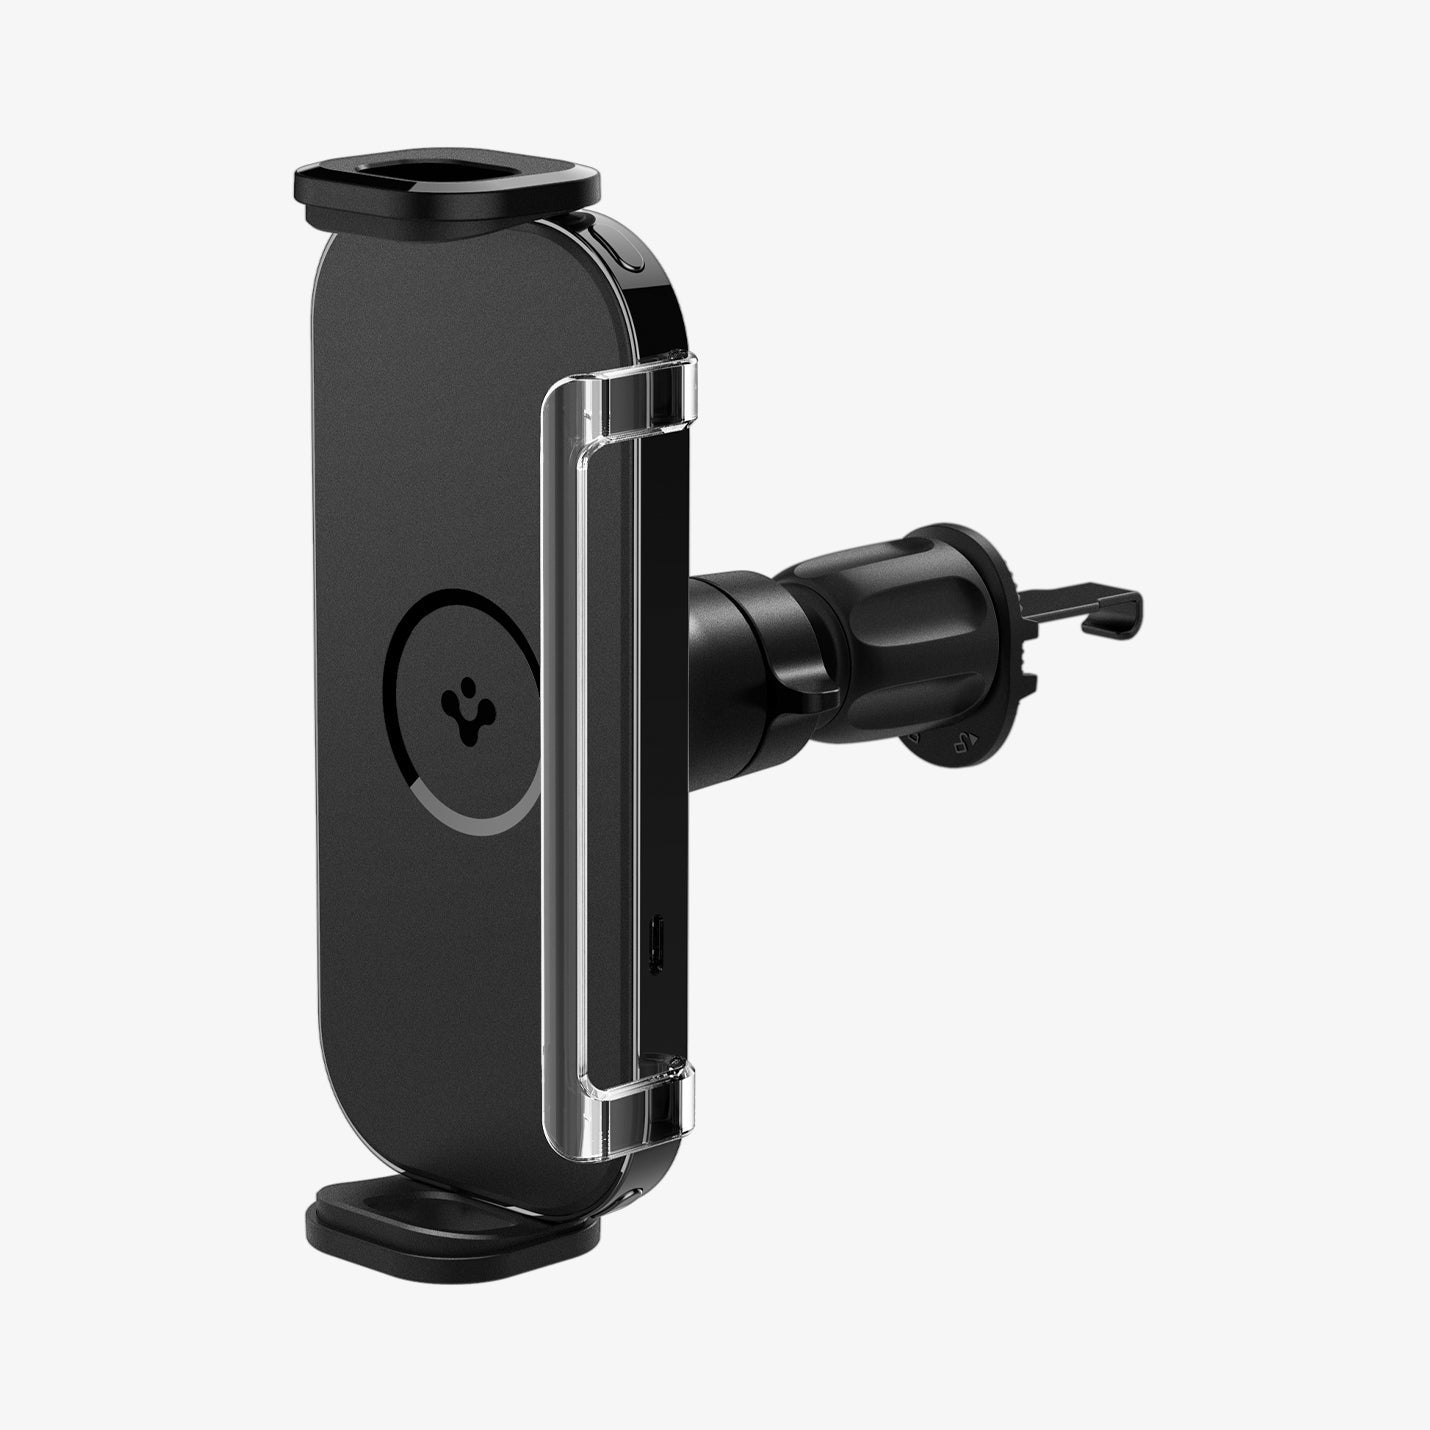 ACP04279 - GTS12W OneTap Wireless Galaxy Fold Car Mount Airvent in black showing the front, bottom and partial back with mount vertical